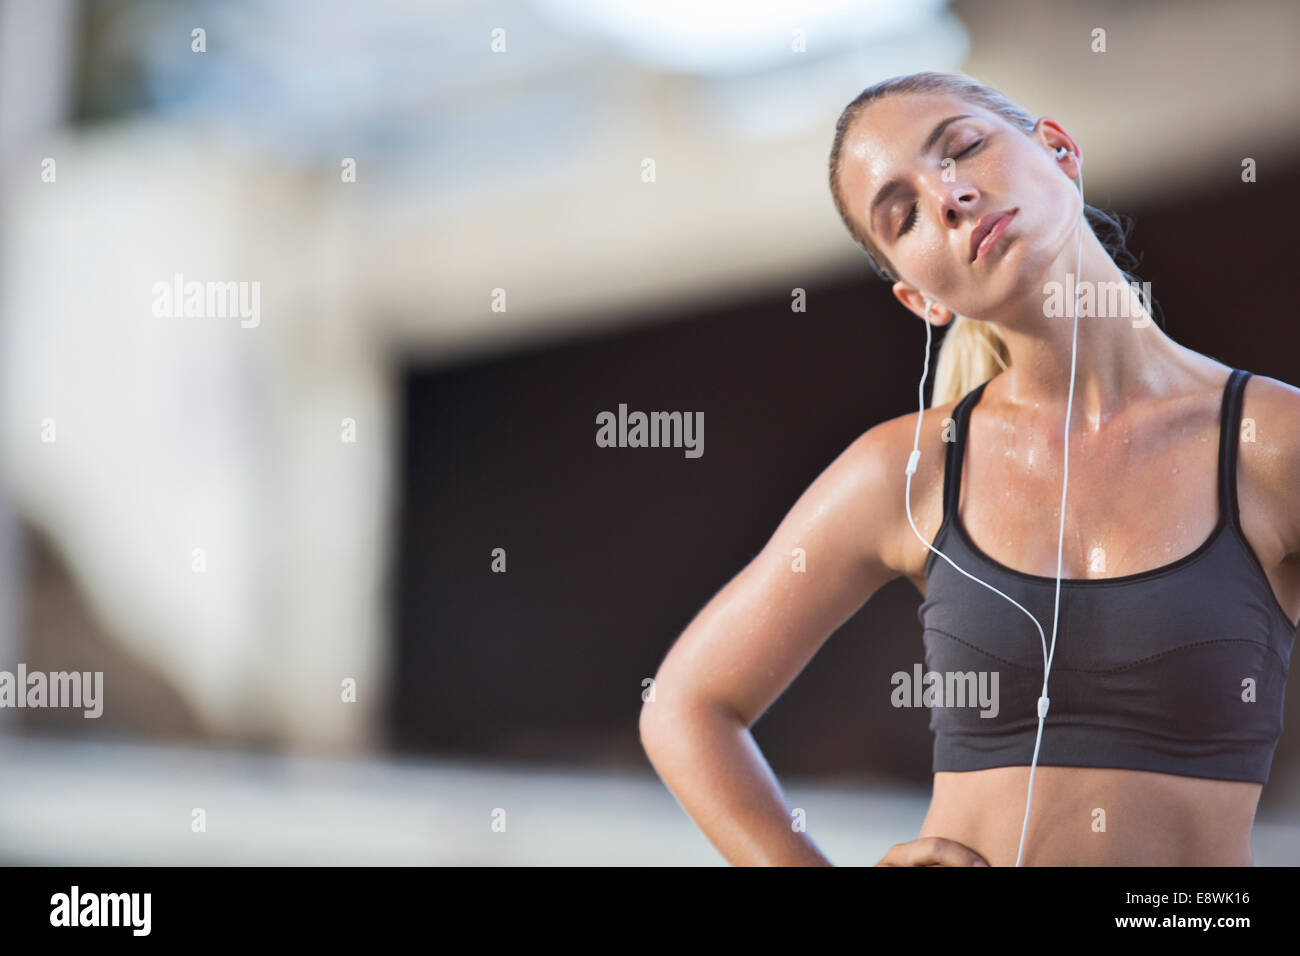 Woman stretching with eyes closed after exercise Stock Photo